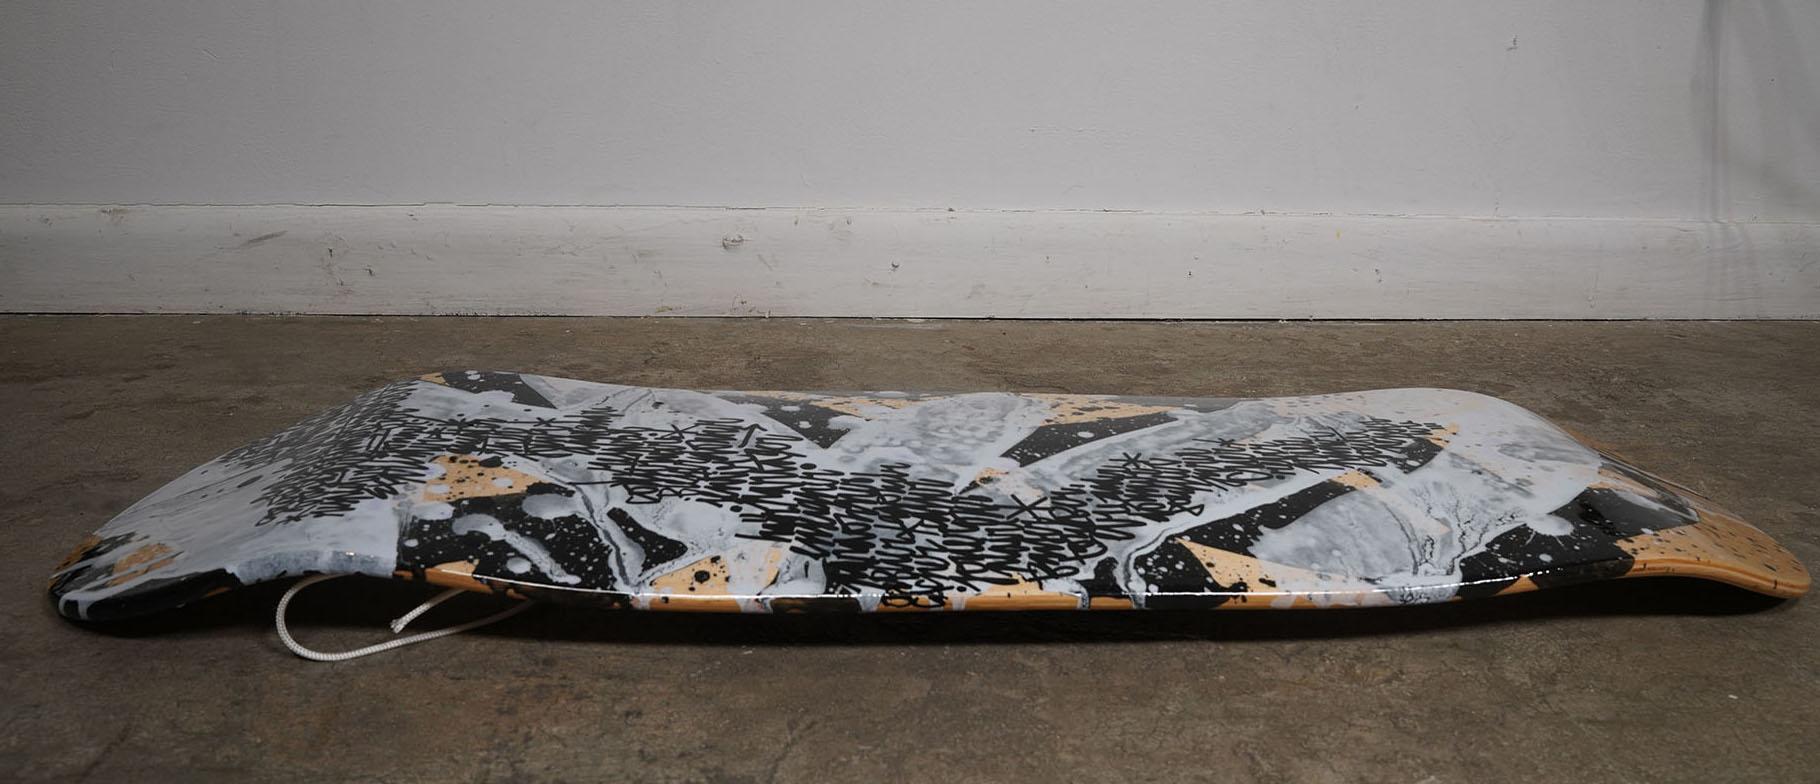 Skate 01 - Contemporary Painting by Denis Meyers